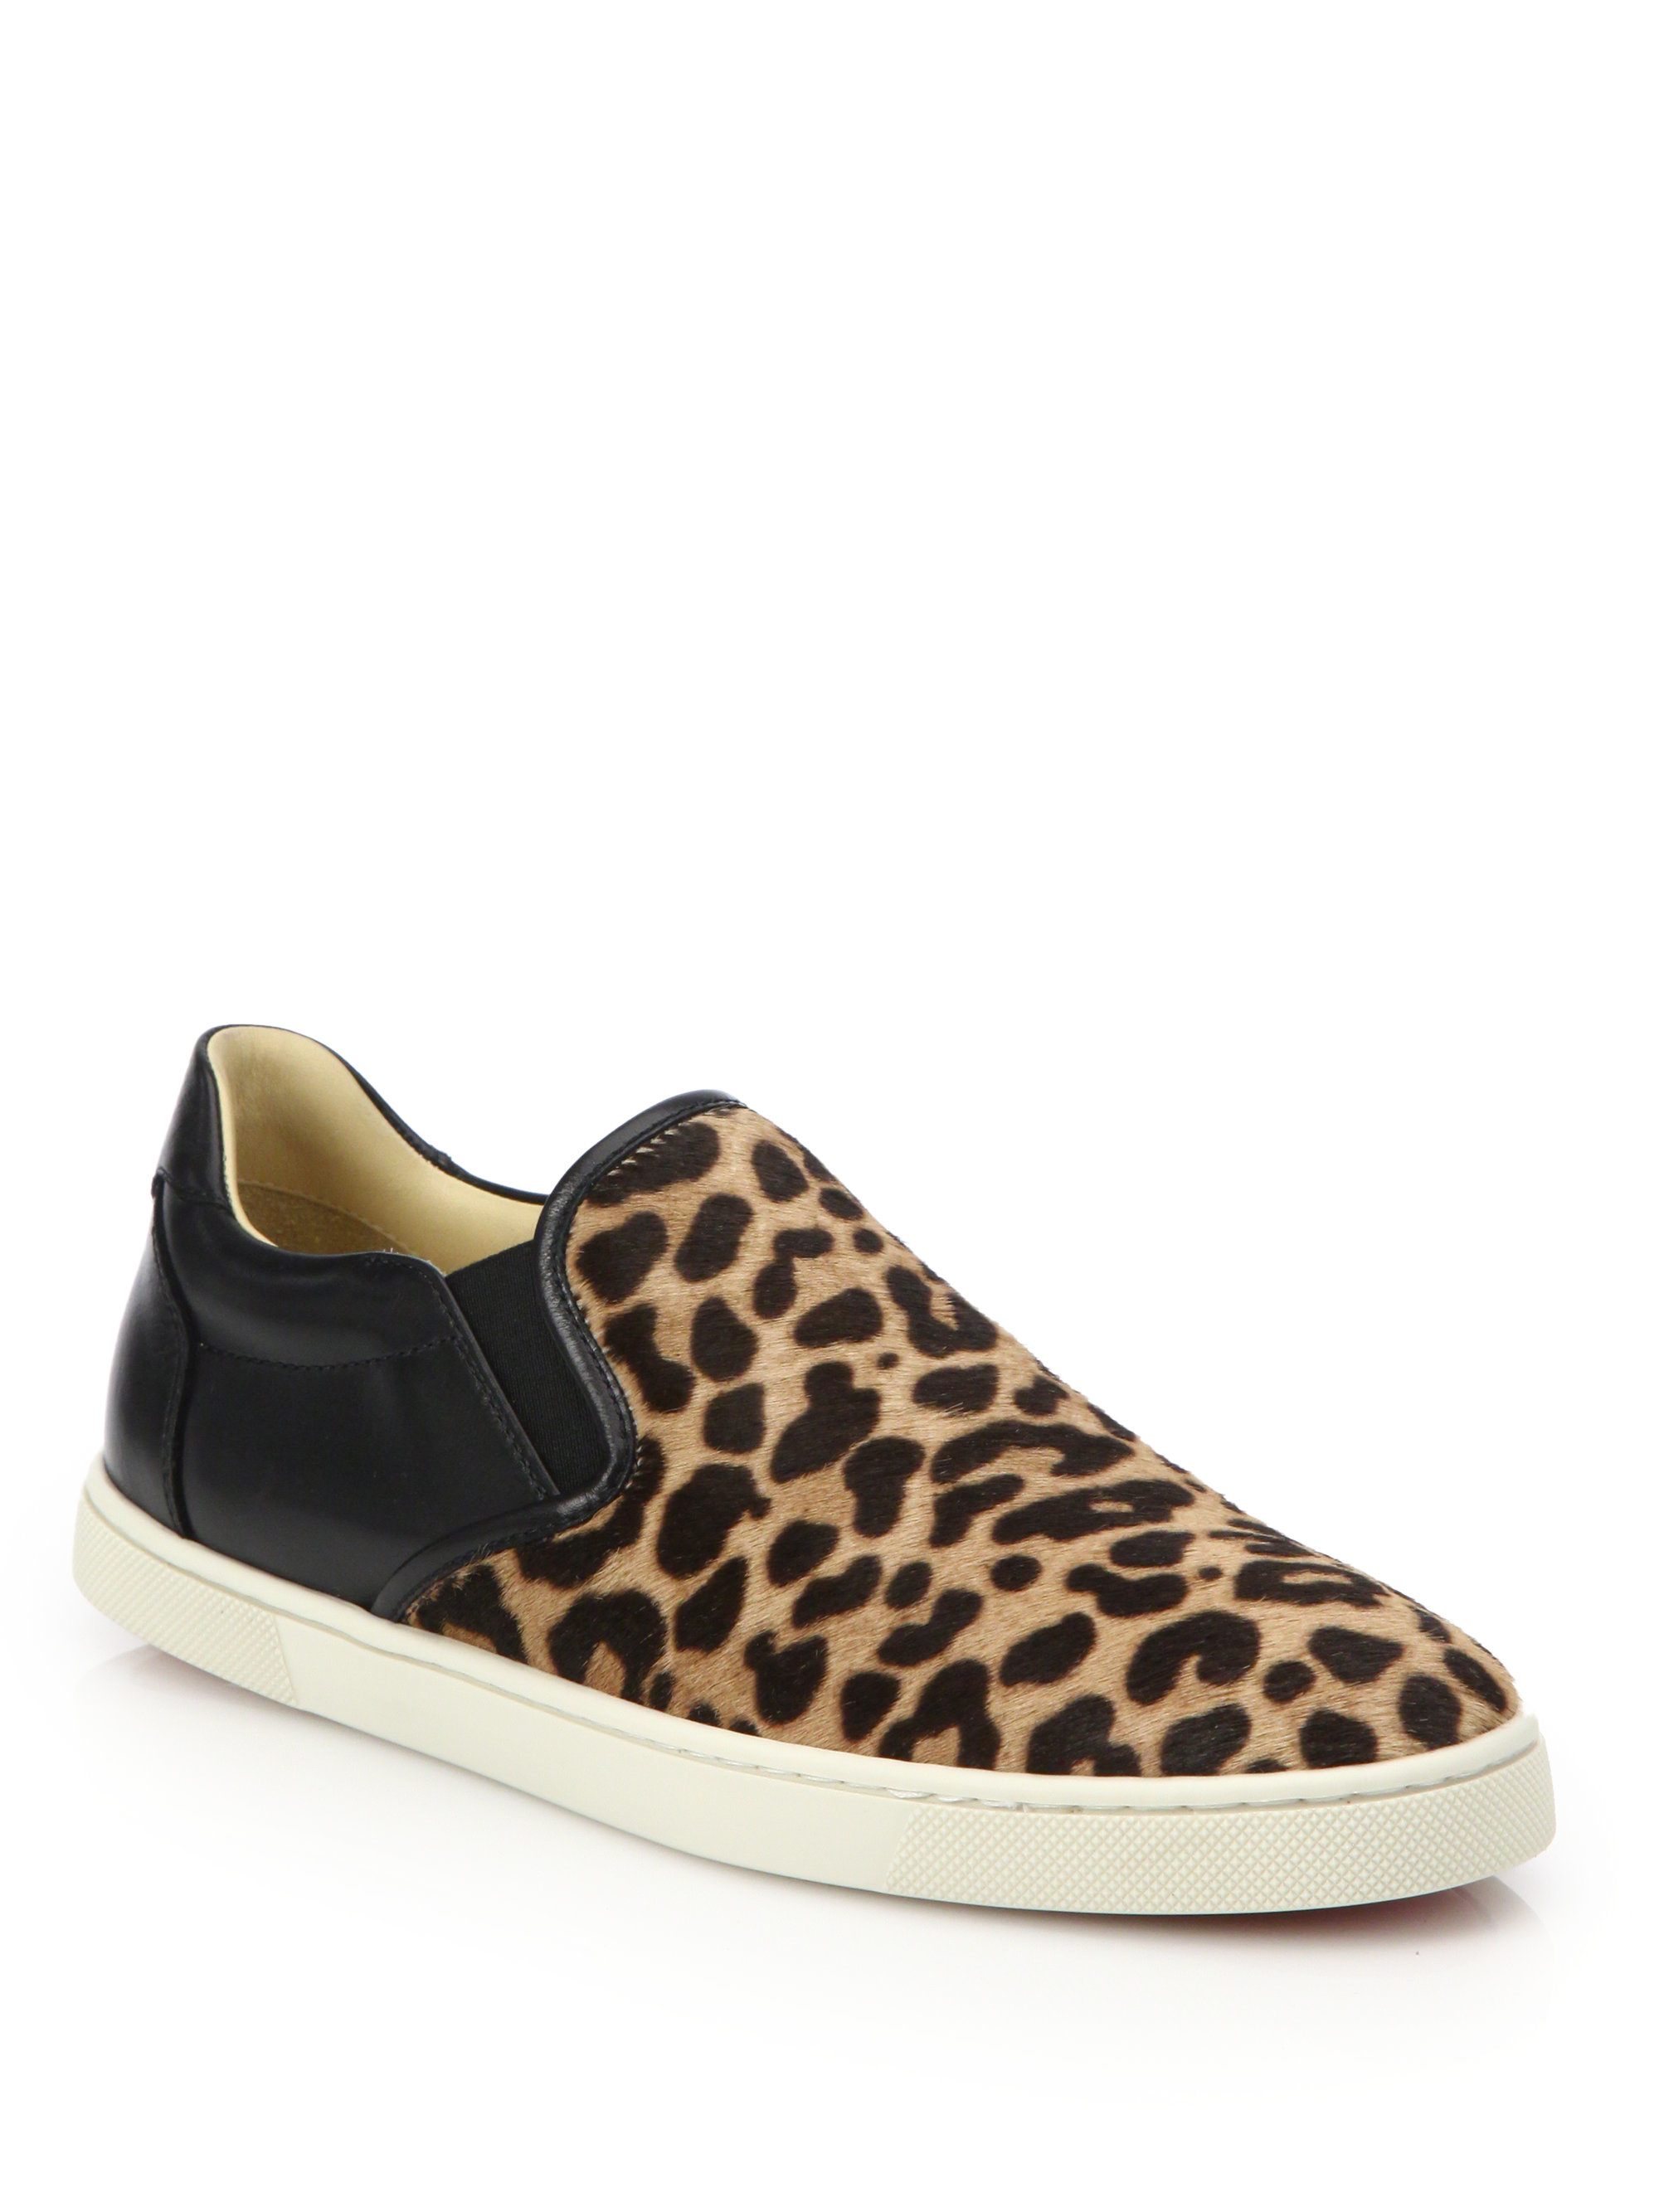 Christian Louboutin Master Key Leopard-print Calf & Leather Slip-on Sneakers | Lyst